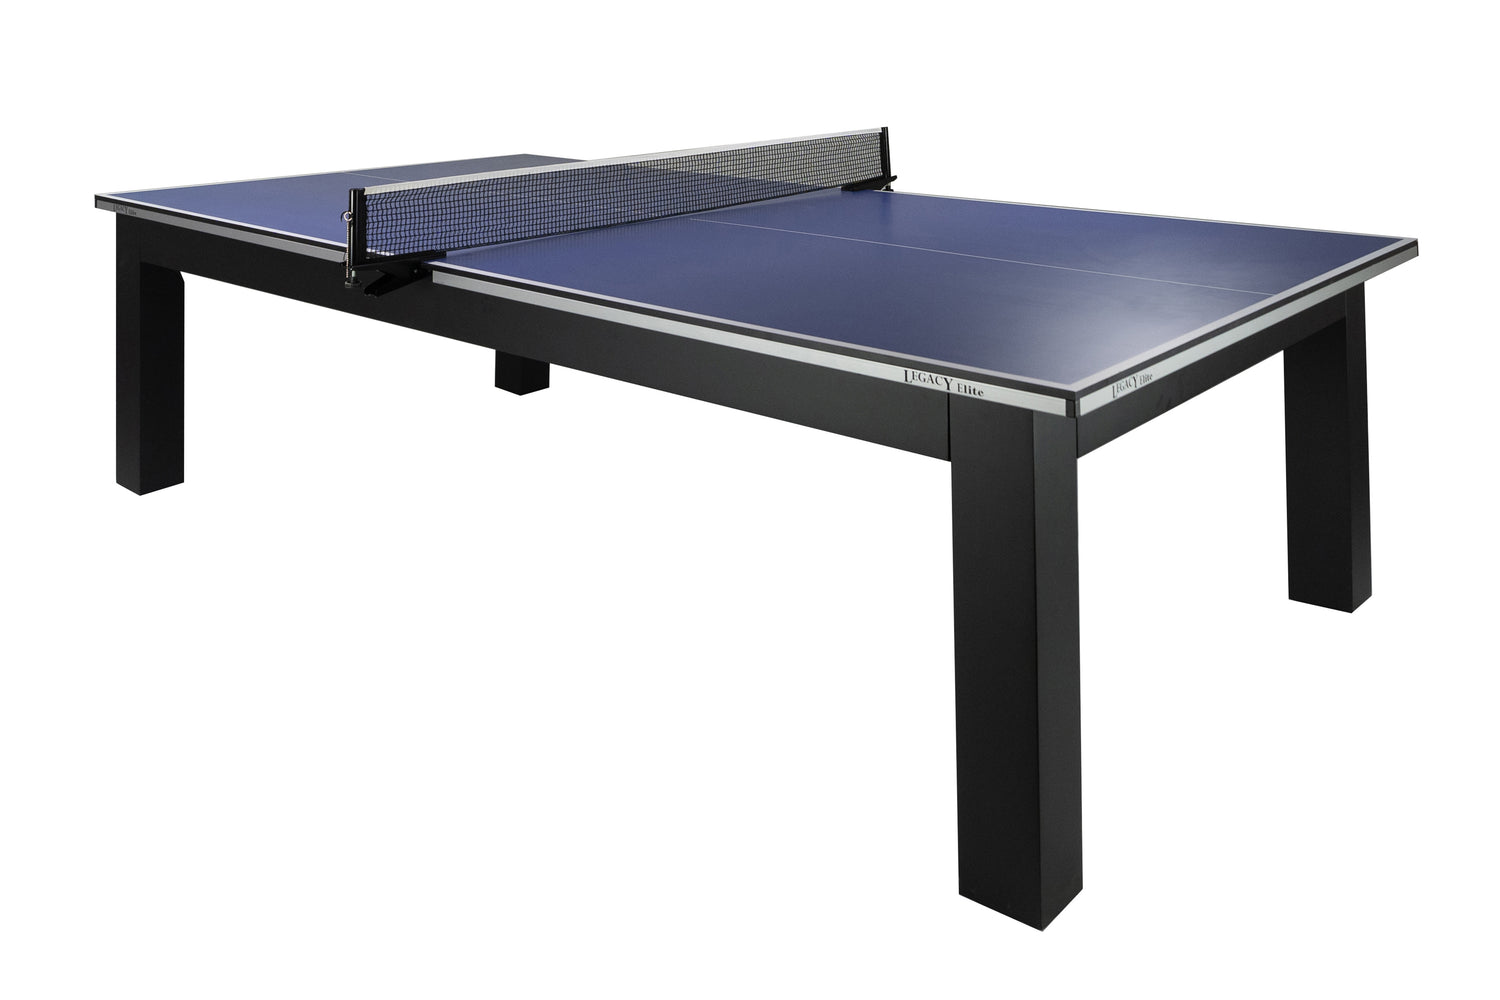 Legacy Billiards Baylor Table Tennis Table in Graphite Finish - Primary Image